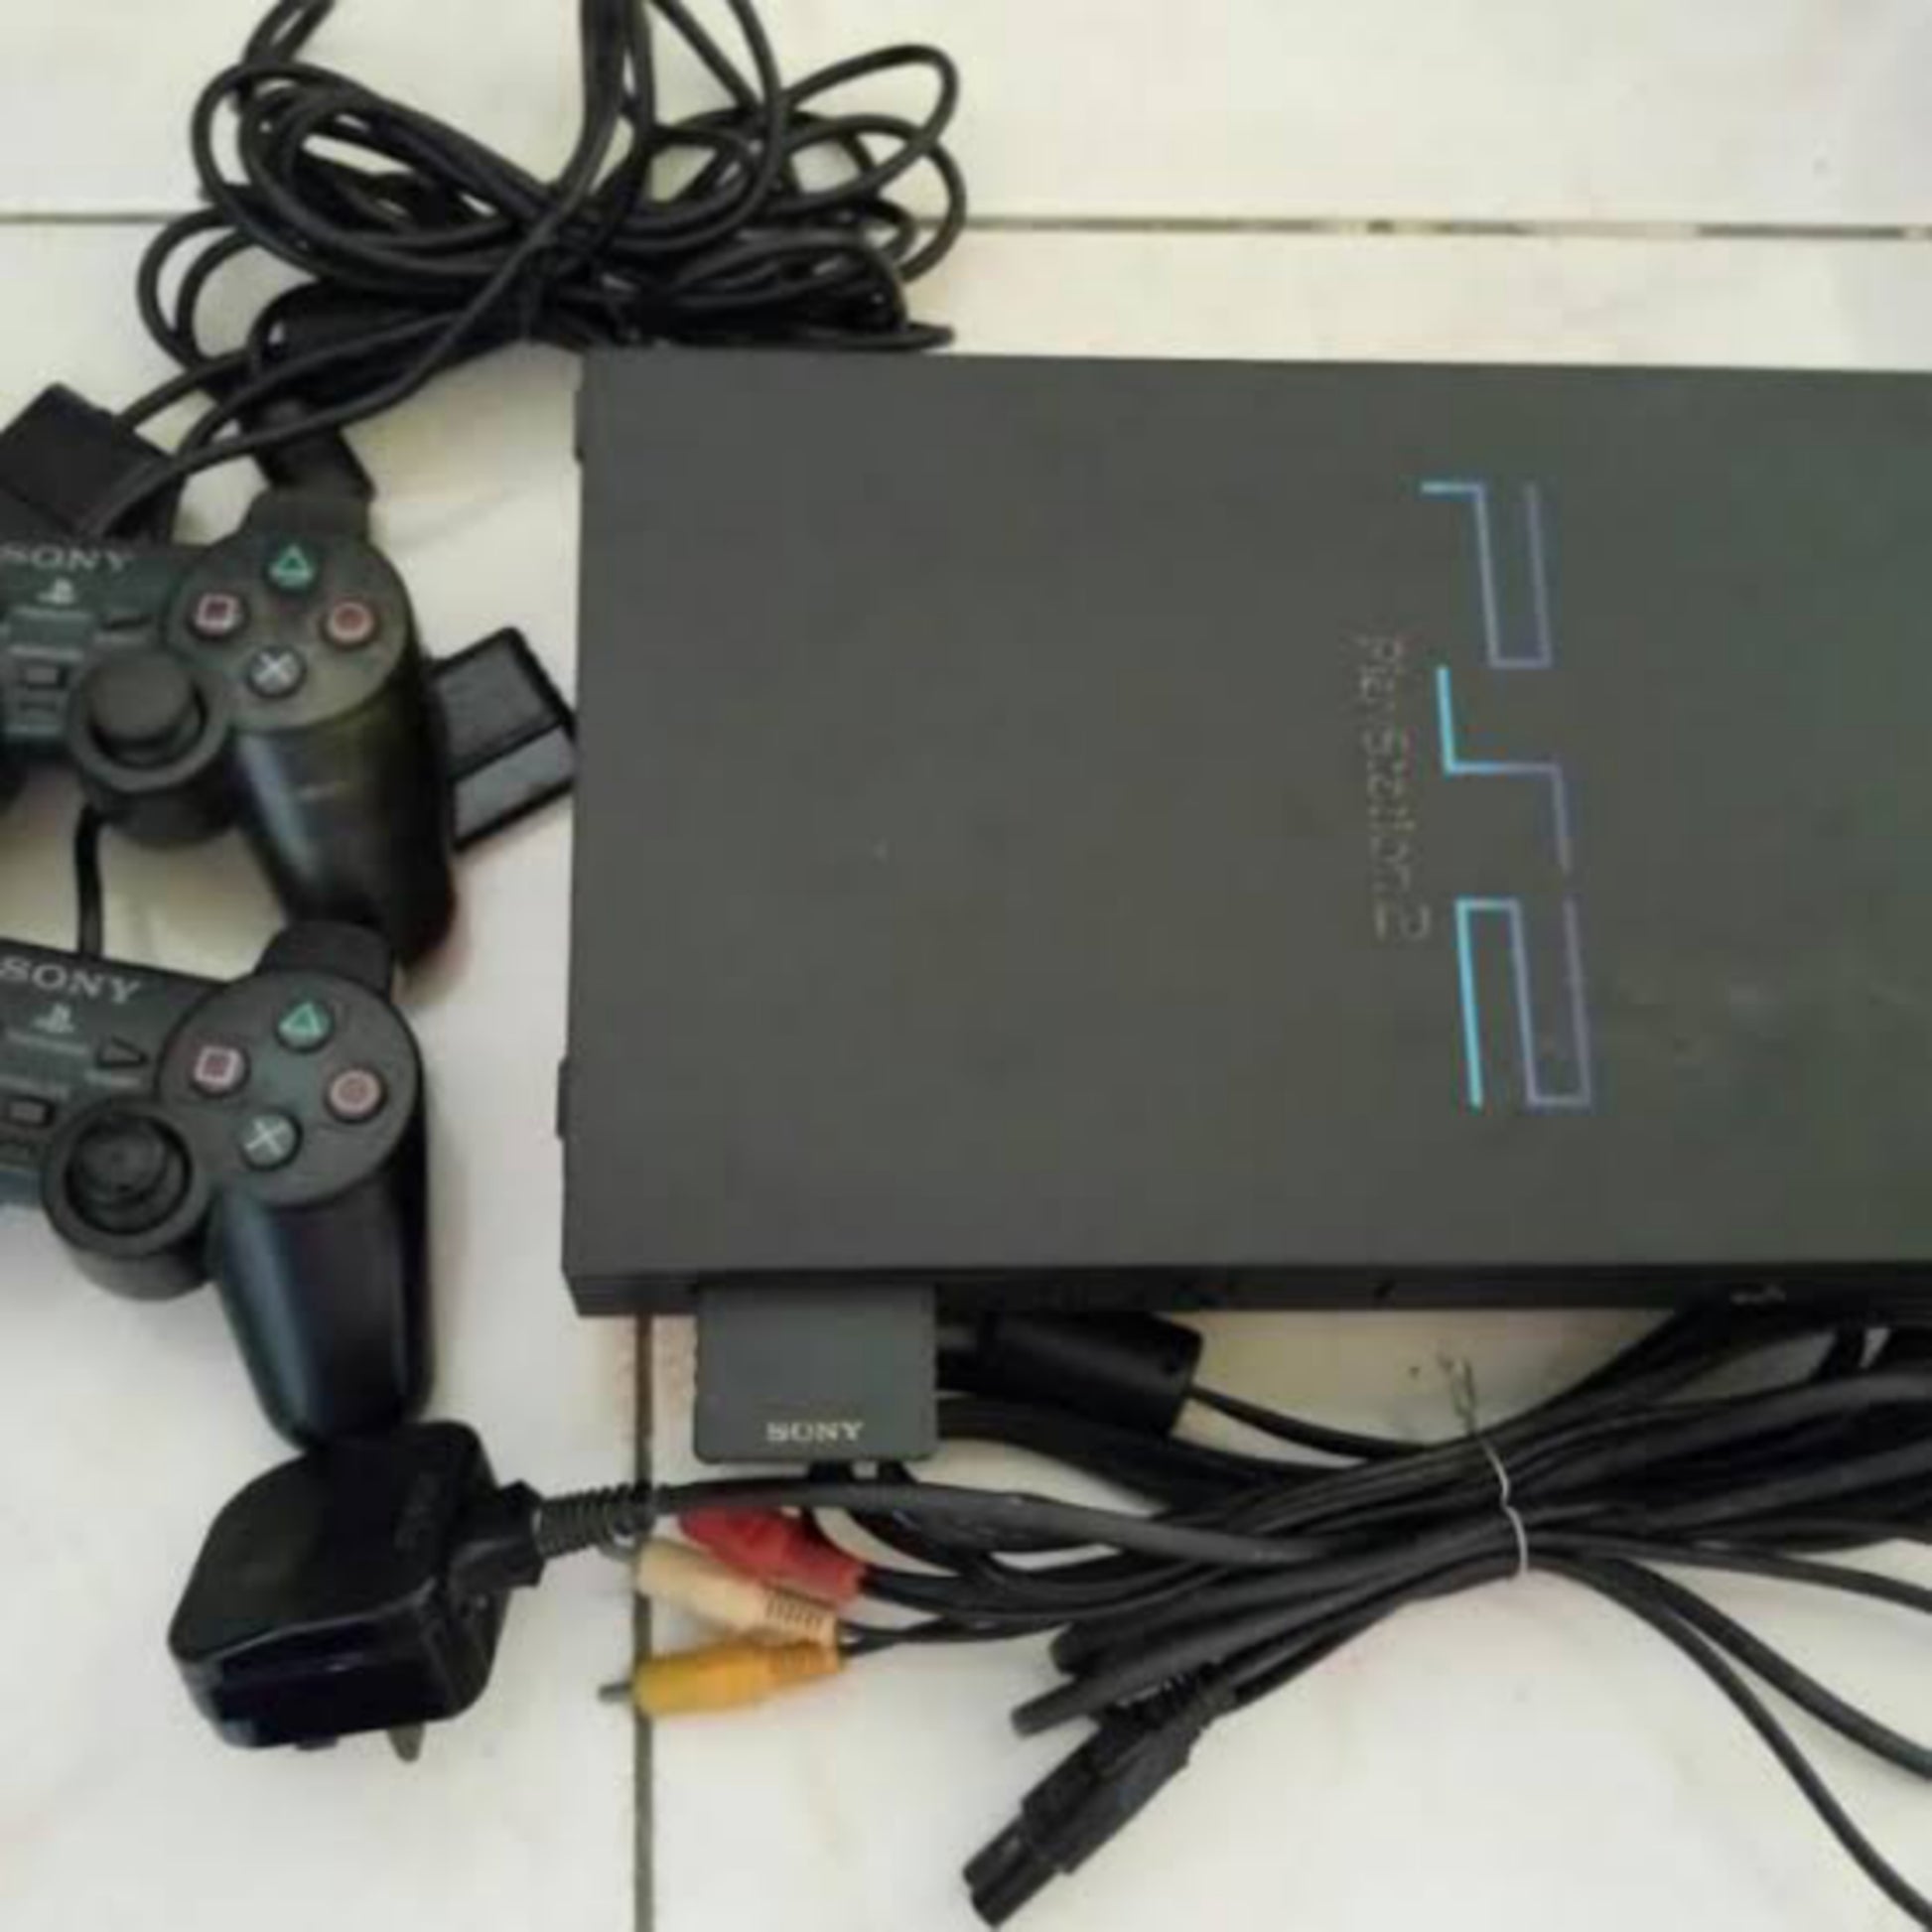 Sony PS2 (Playstation 2) Wireless Game Controller - Brand New – IFESOLOX